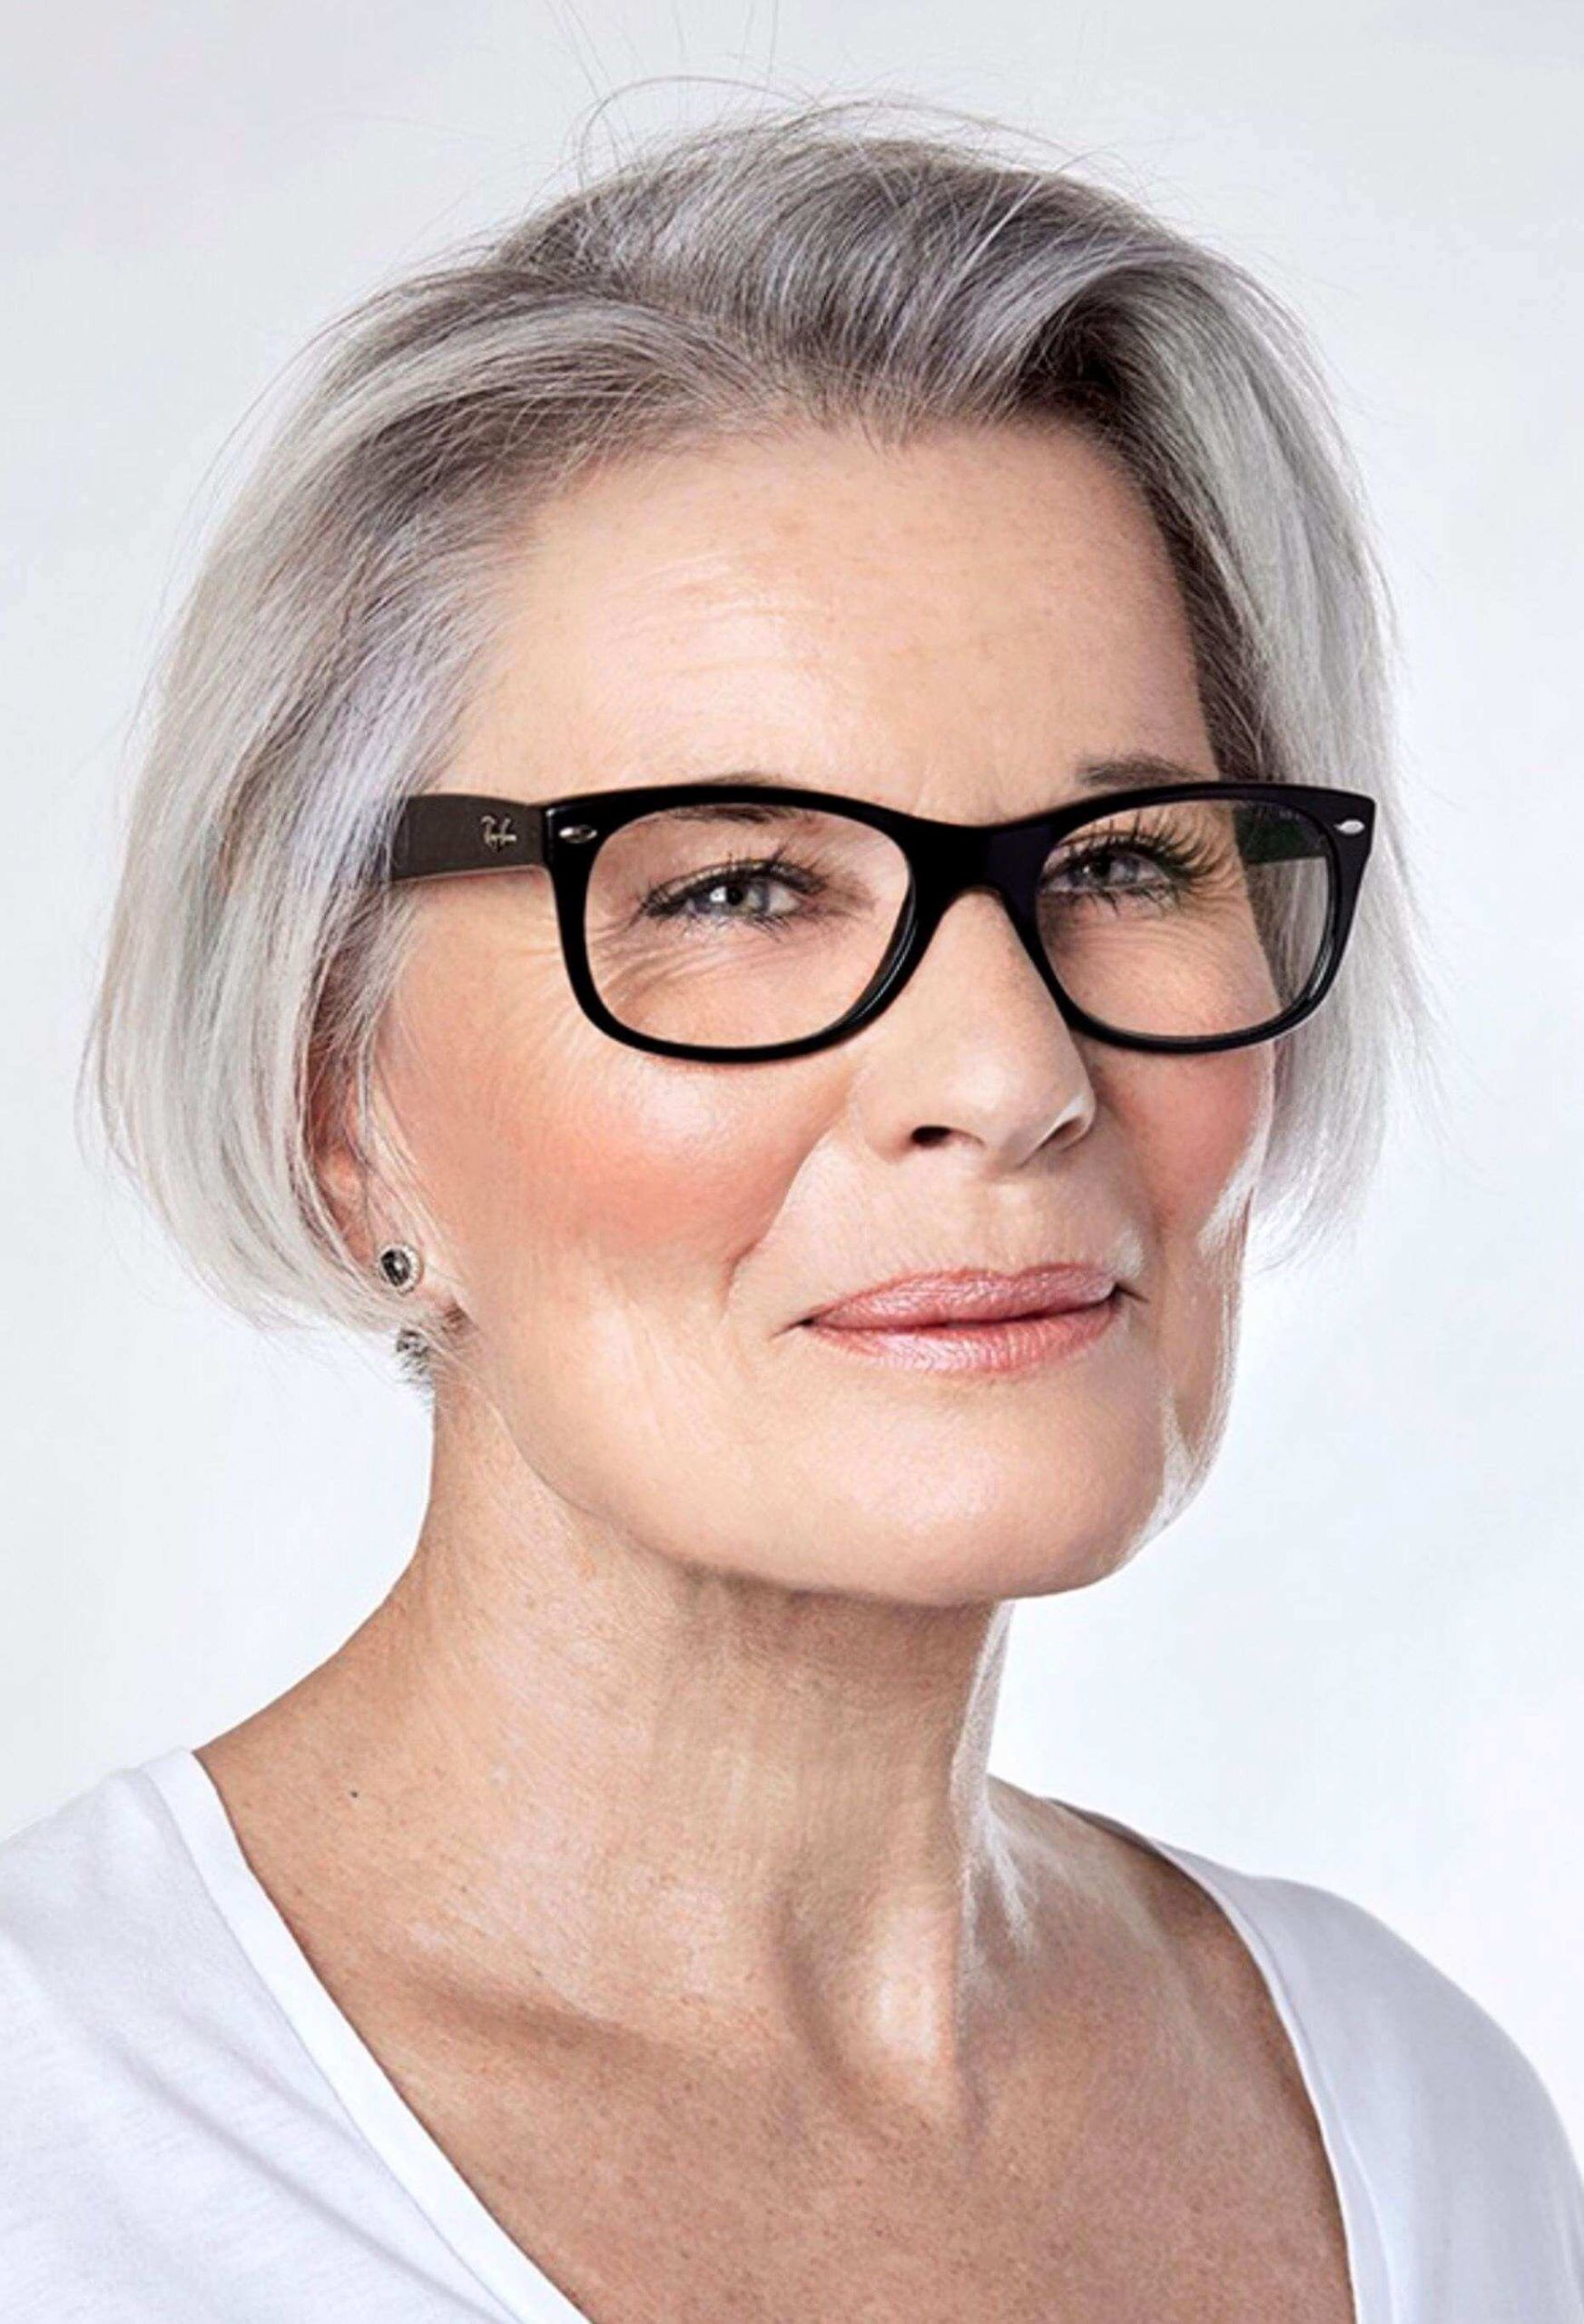 Hairstyles For Women Over 50 With Glasses
 70 Hairstyles for Women Over 50 with Glasses